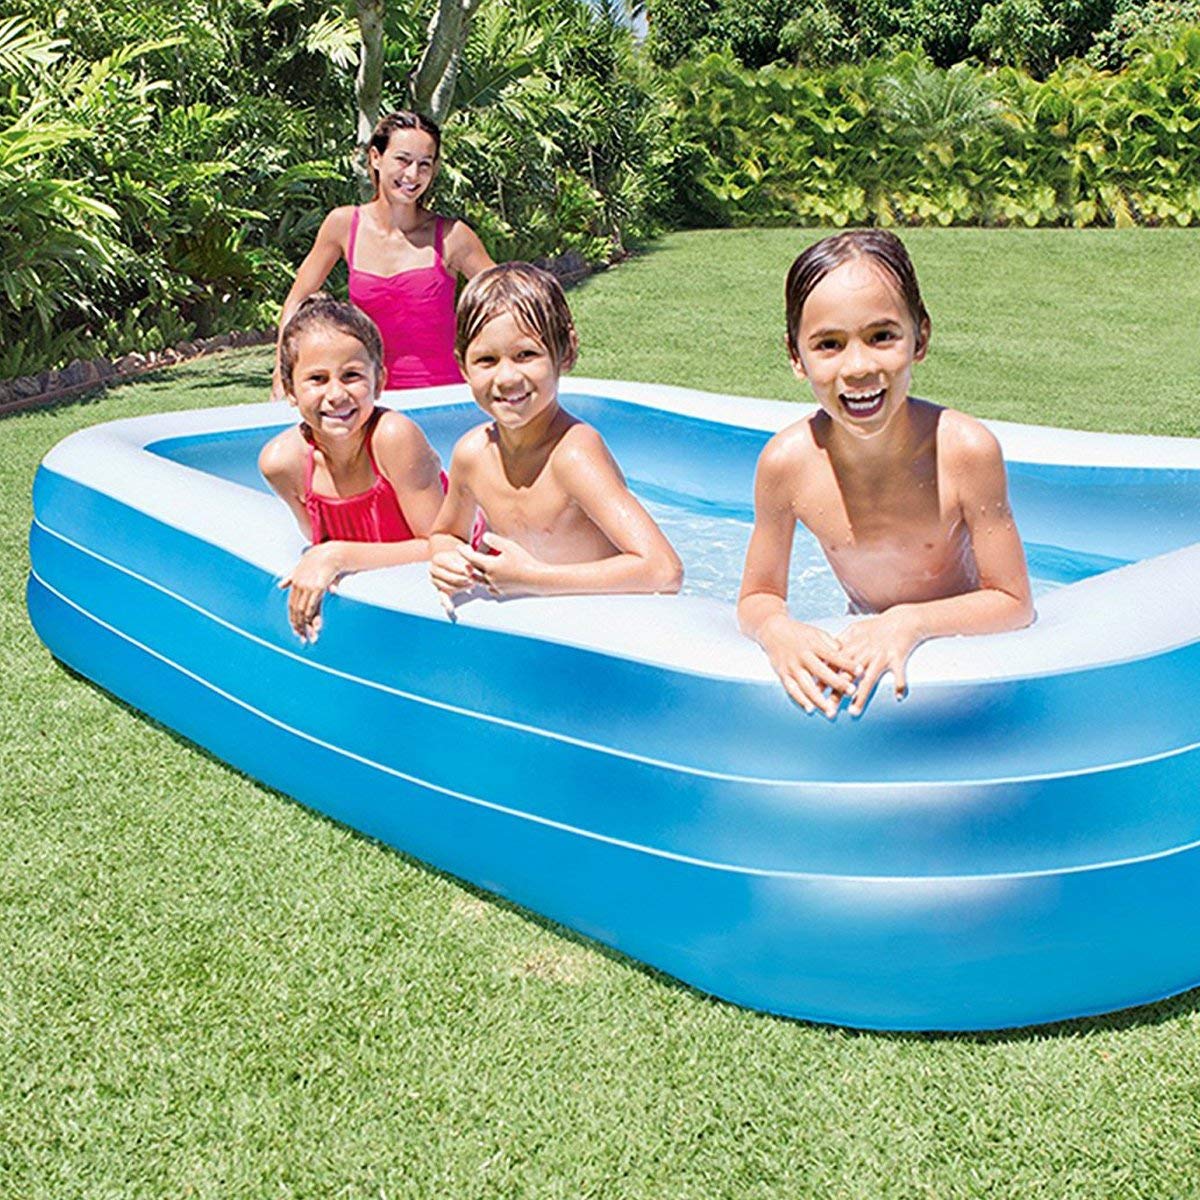 Intex 58484 Swim Center Family Inflatable Pool (Blue) - 269-Gallon Water Capacity | Suitable for Kids and Adults | 120"x72"x22